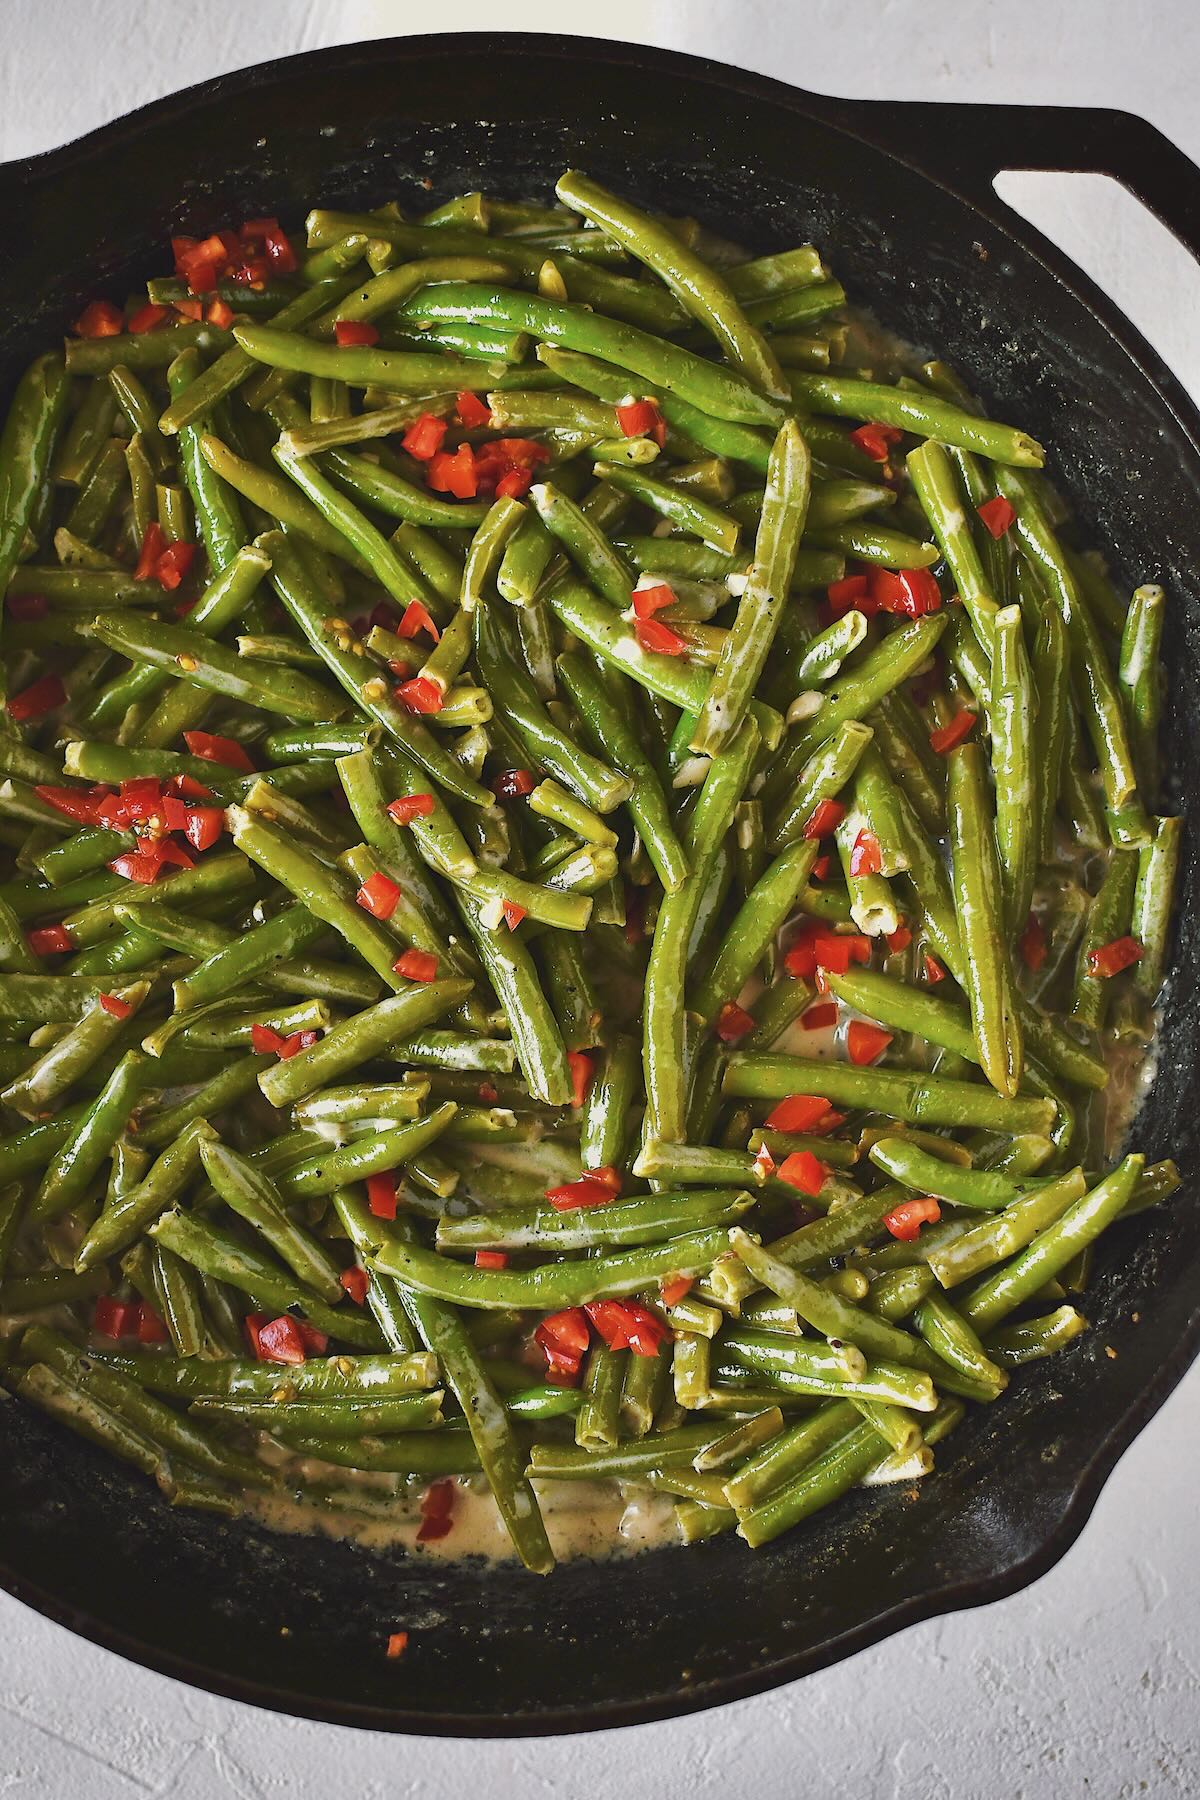 Creamed Green Beans ready to eat and topped with some diced tomatoes.